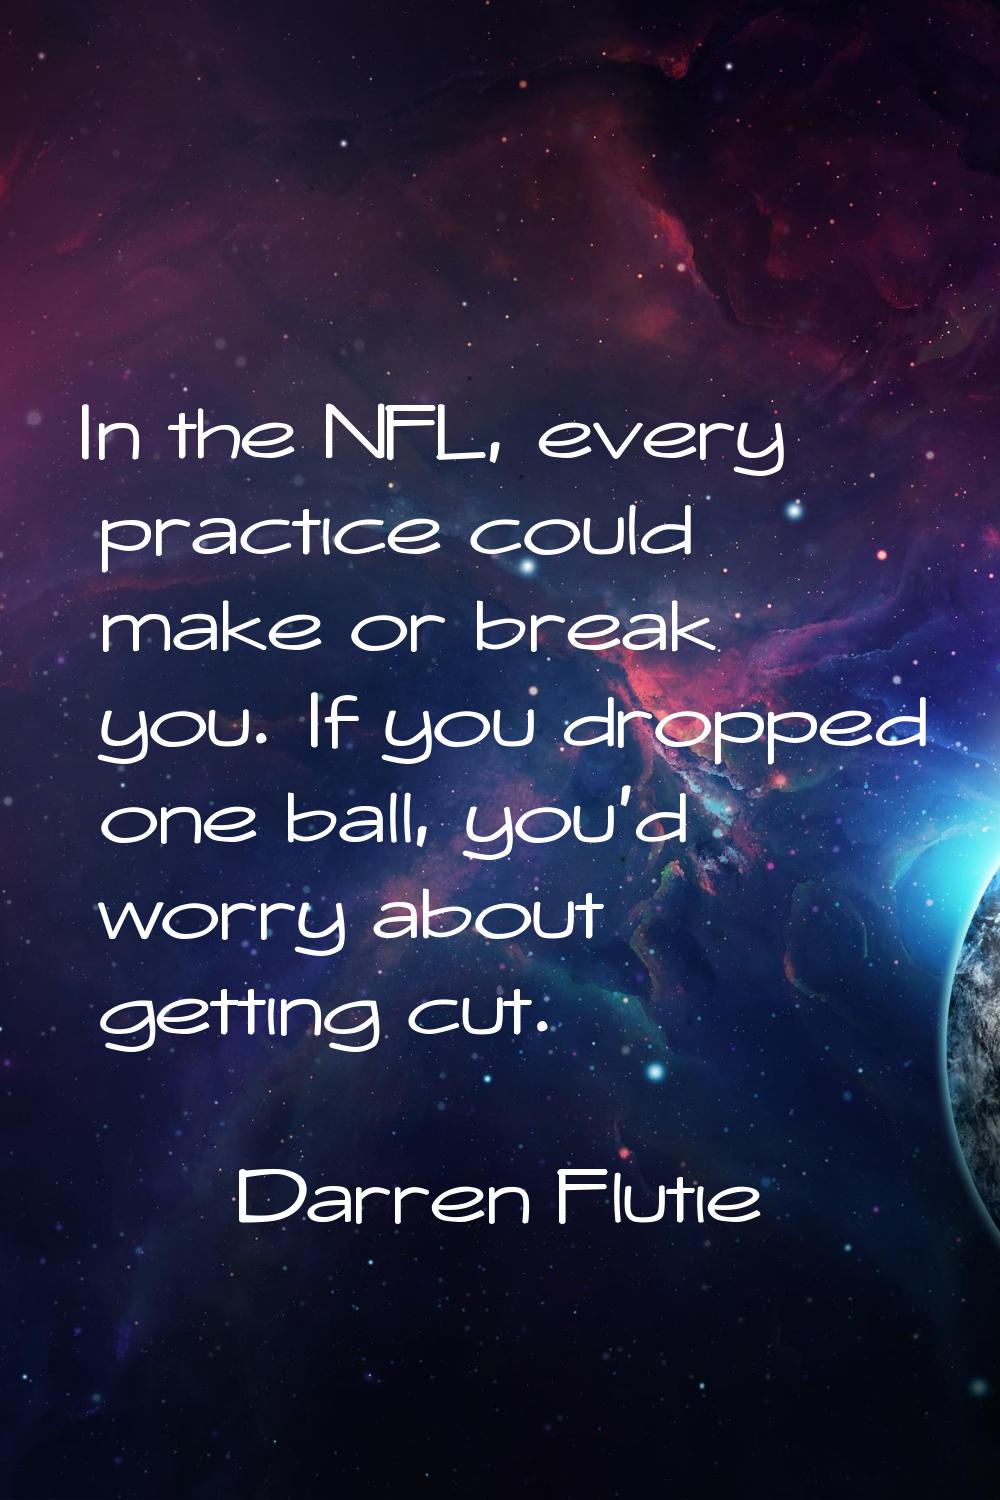 In the NFL, every practice could make or break you. If you dropped one ball, you'd worry about gett